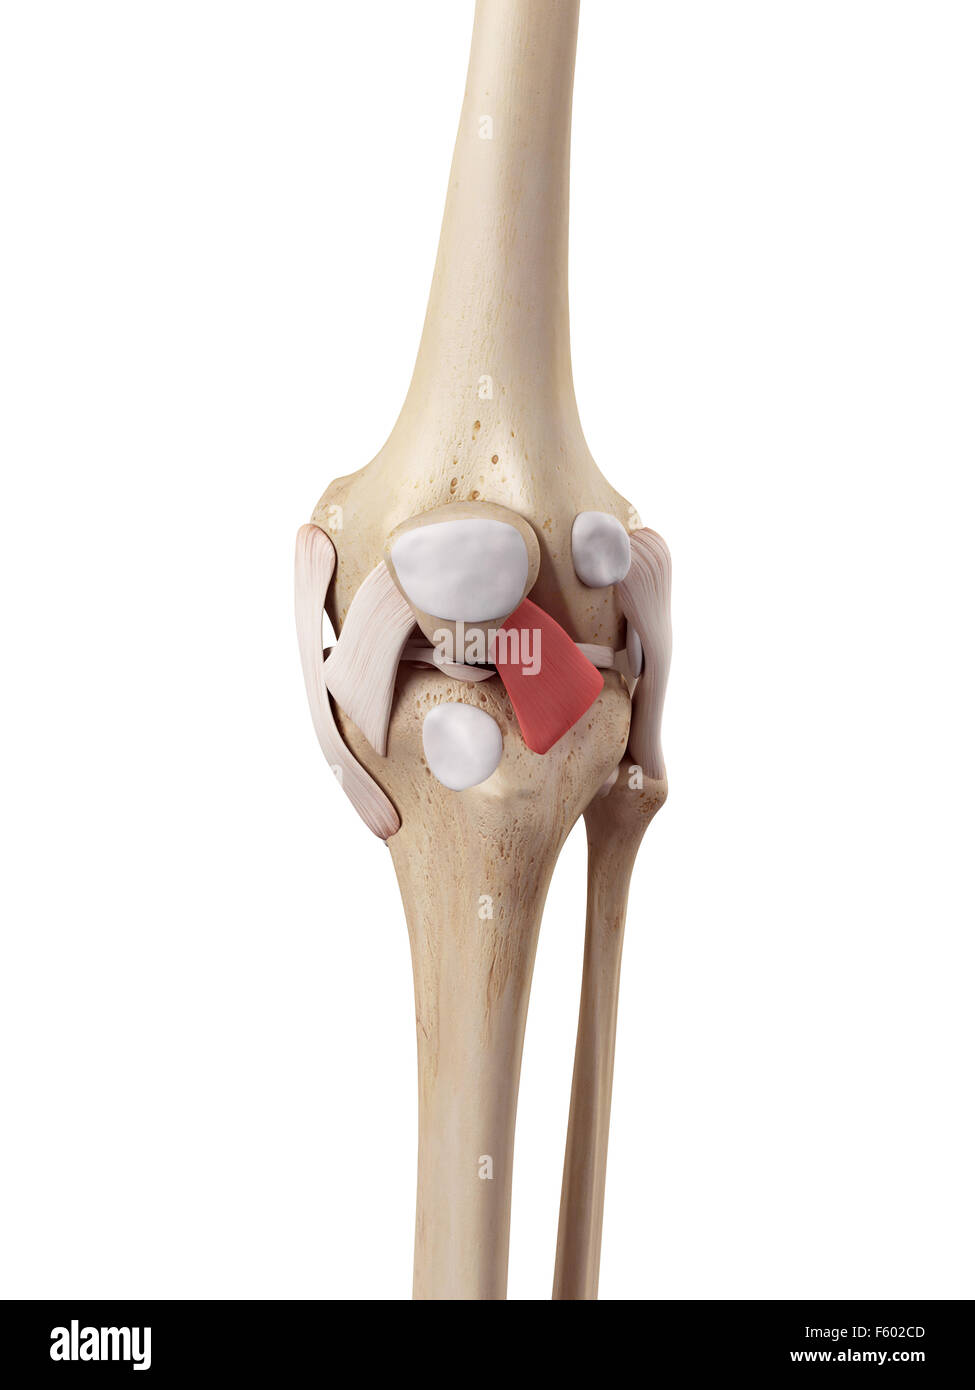 medical accurate illustration of the lateral patellar ligament Stock Photo